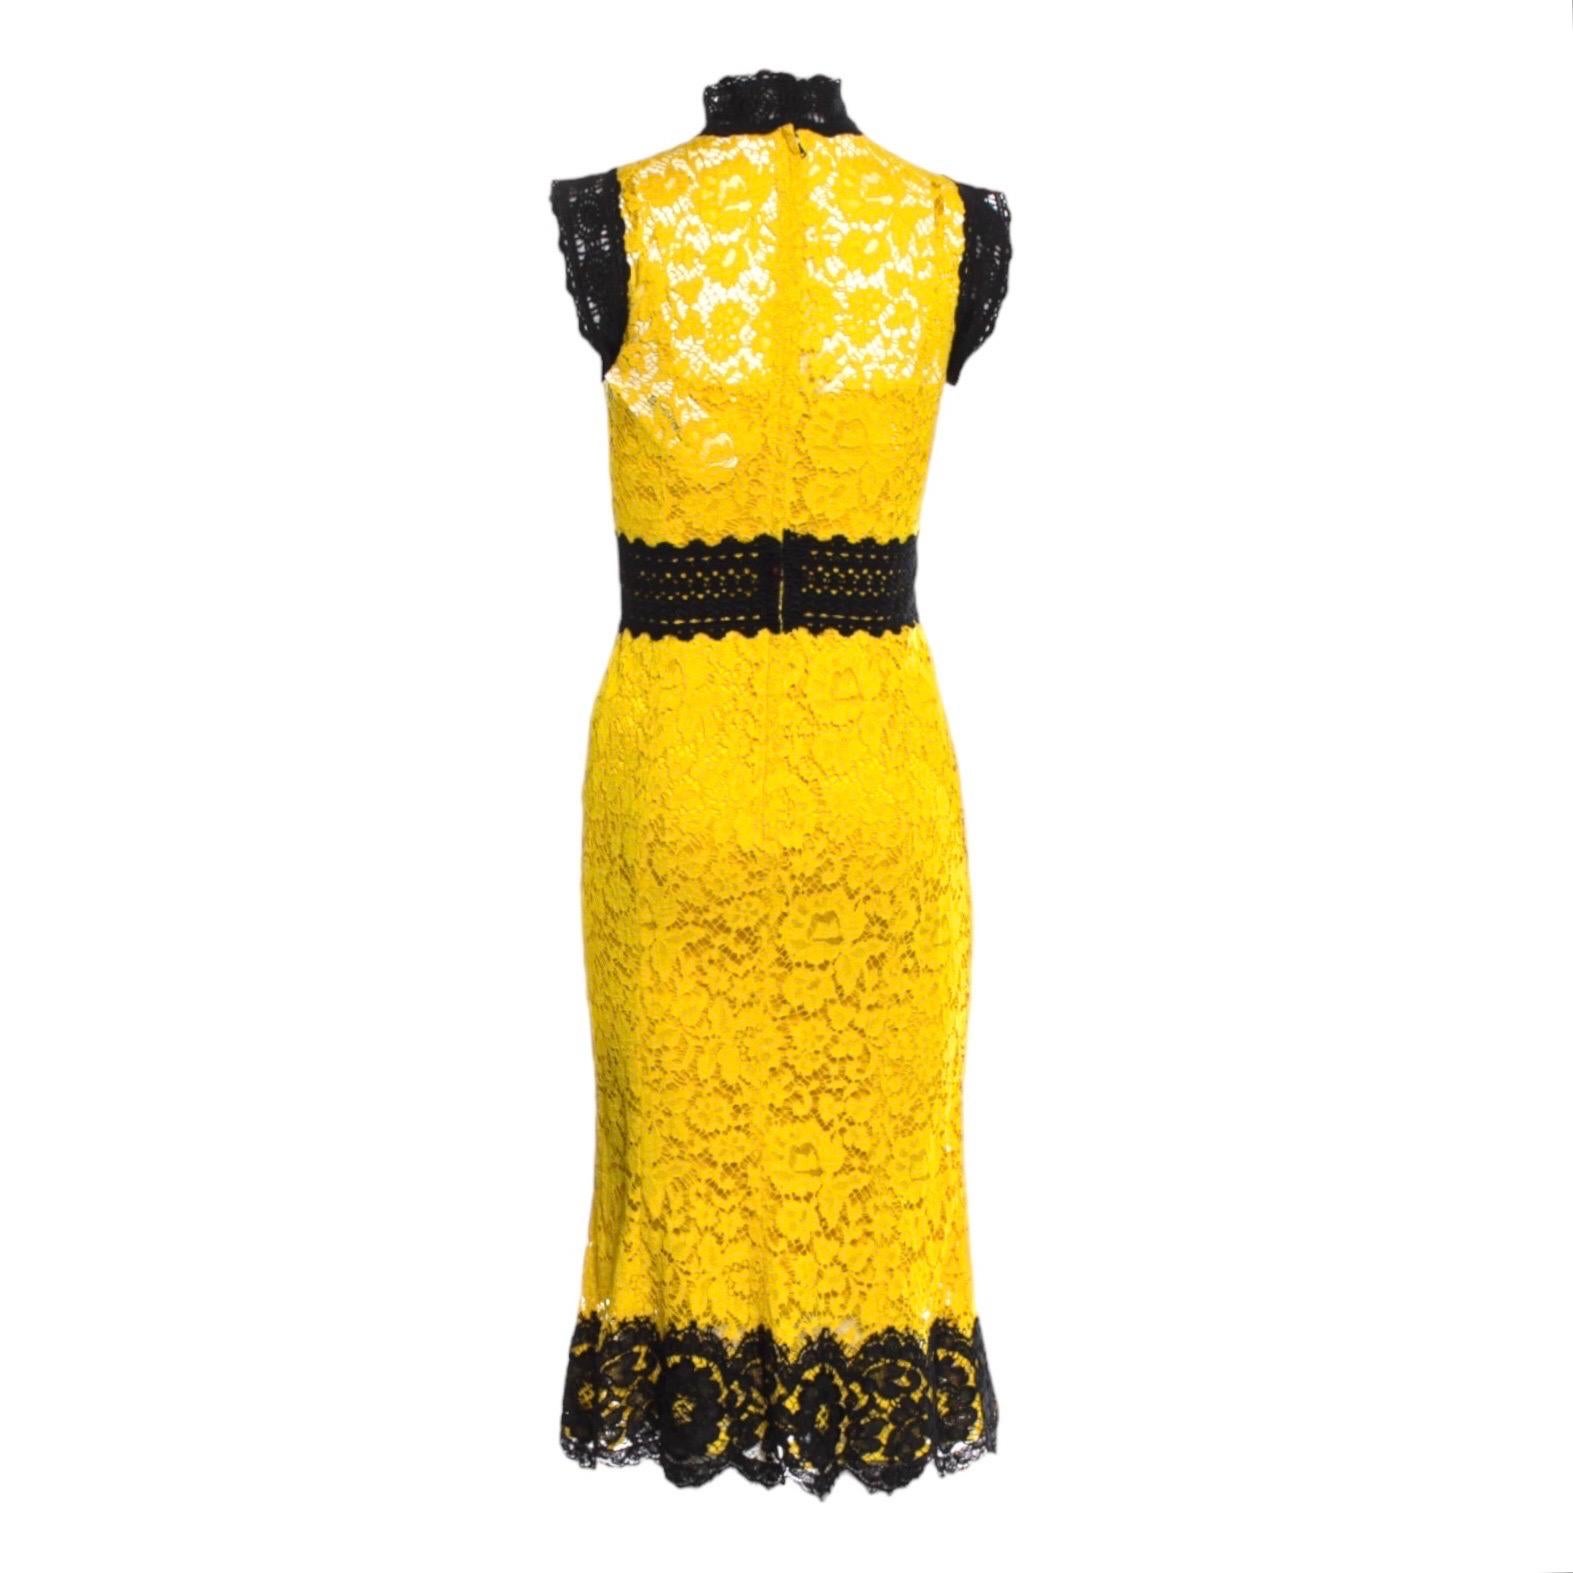 UNWORN Dolce & Gabbana Yellow & Black Guipure Lace Evening Cocktail Dress 40 In New Condition For Sale In Switzerland, CH